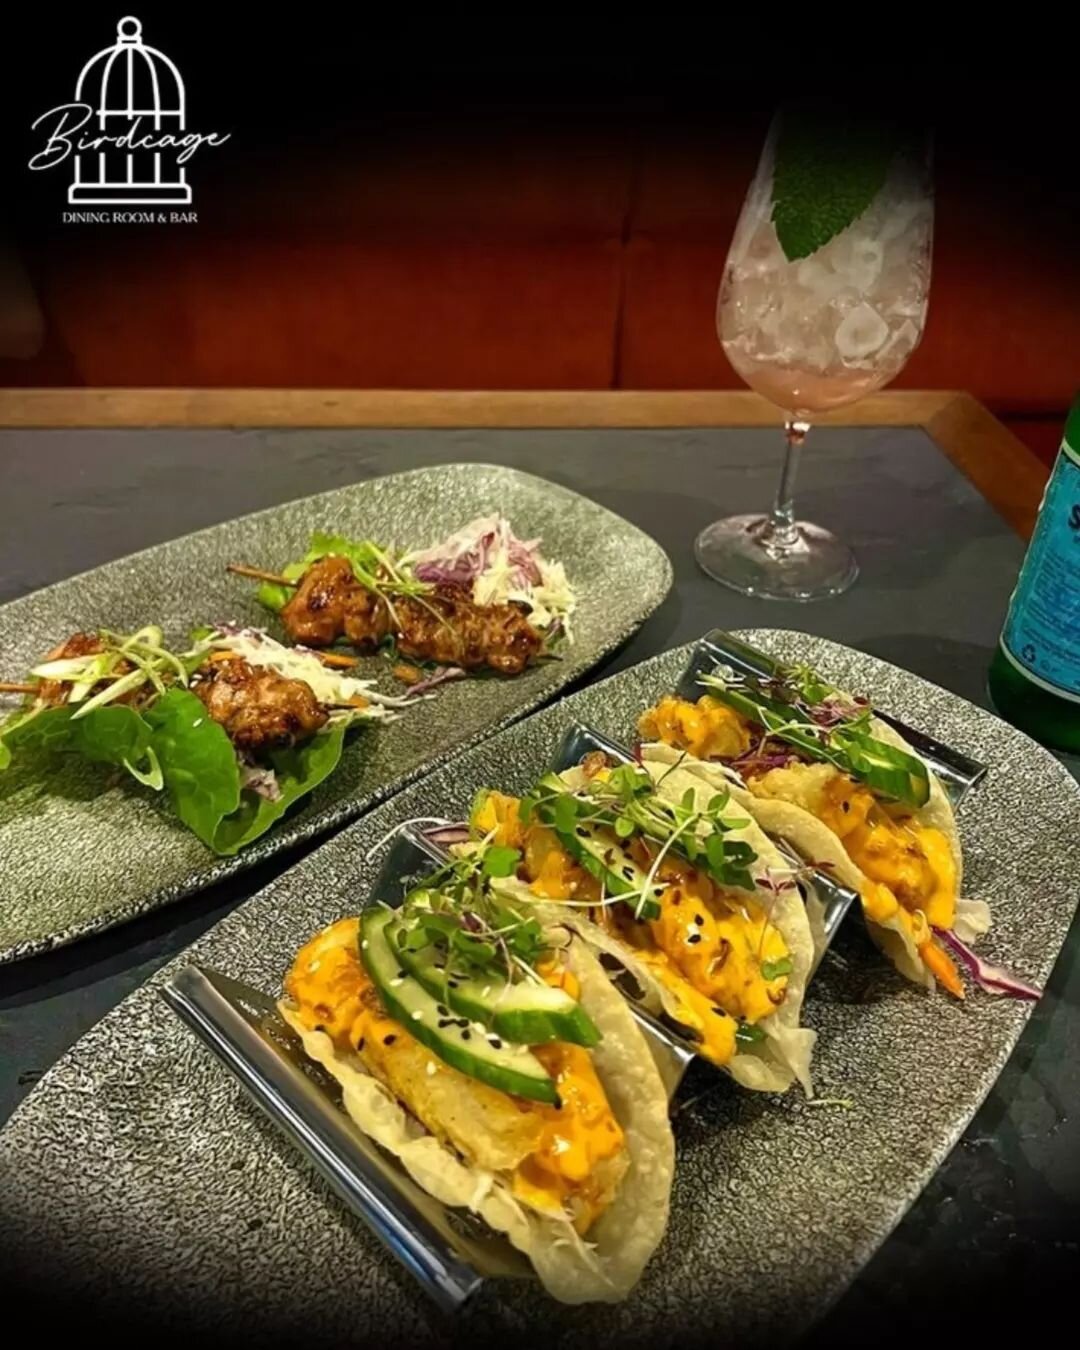 Today is National Crunchy Taco Day so get yourself down to @birdcagediningroomandbar and indulge! 🌮👏🏼

Not that we really need an excuse but now you have one! Book with them via their link in bio on their page or 📲 07 2112 5888